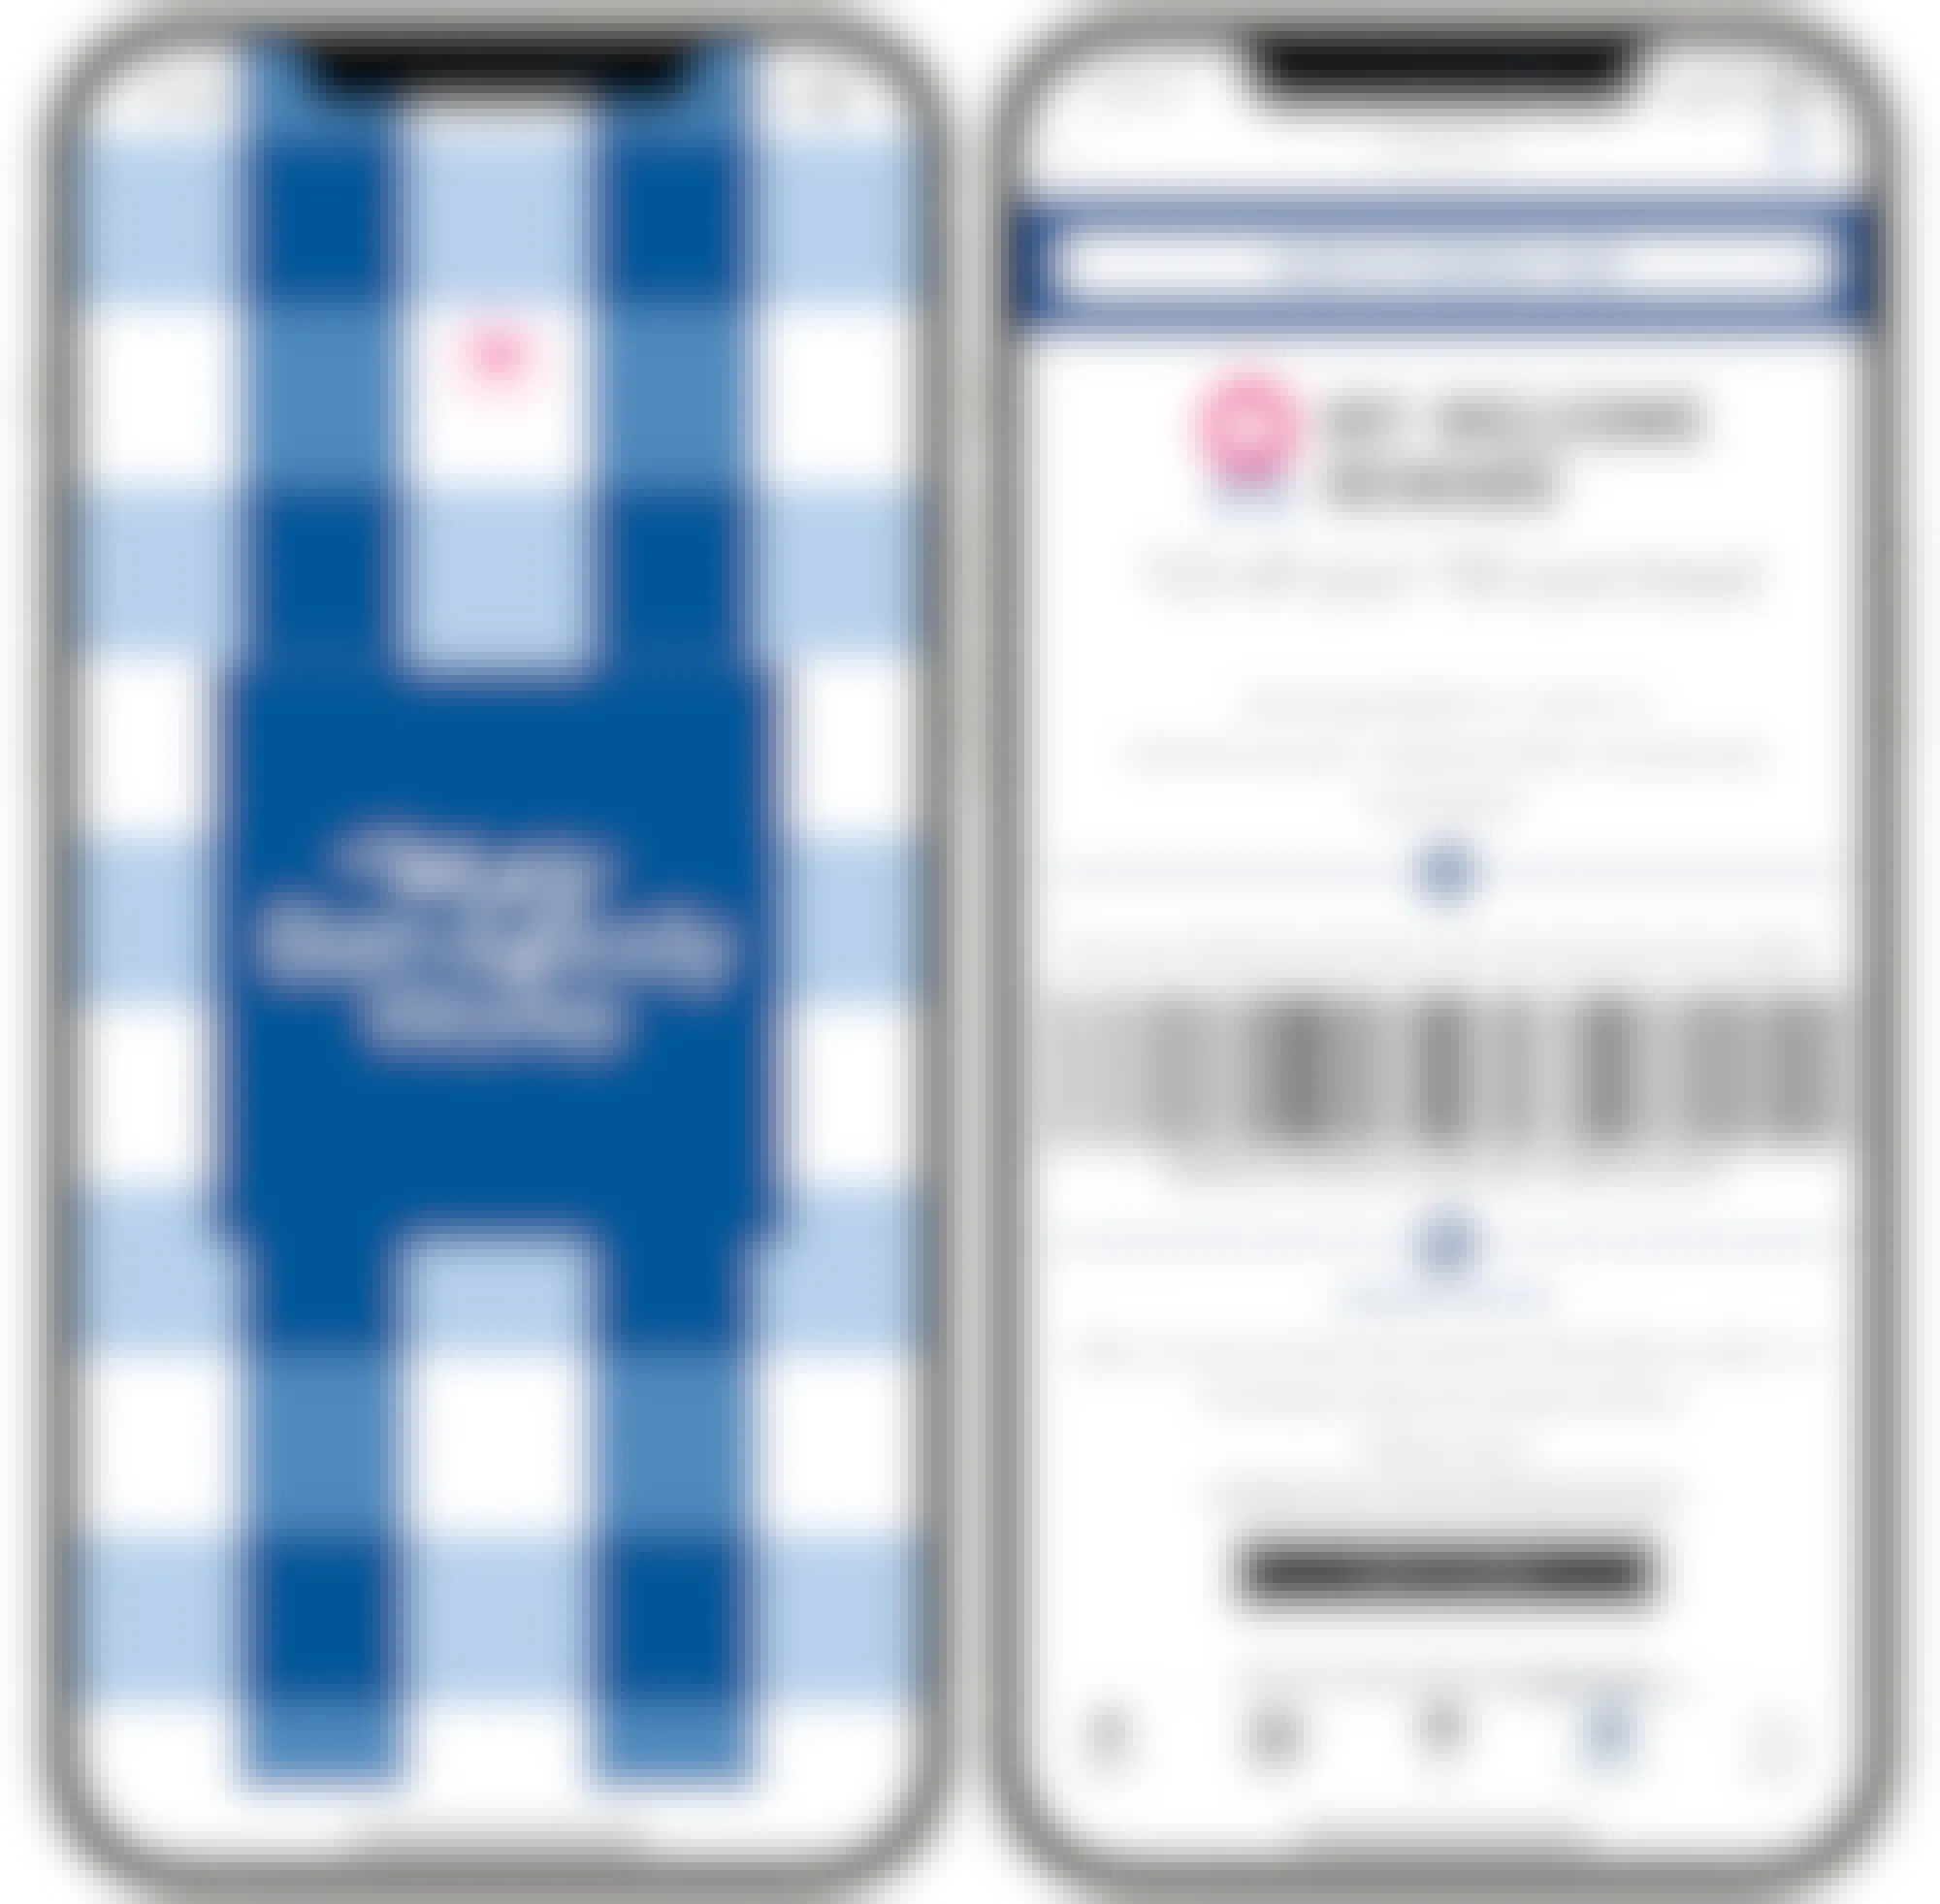 Cell phone screens displaying the My Bath & Body Works app home screen and a My Welcome Reward coupon.